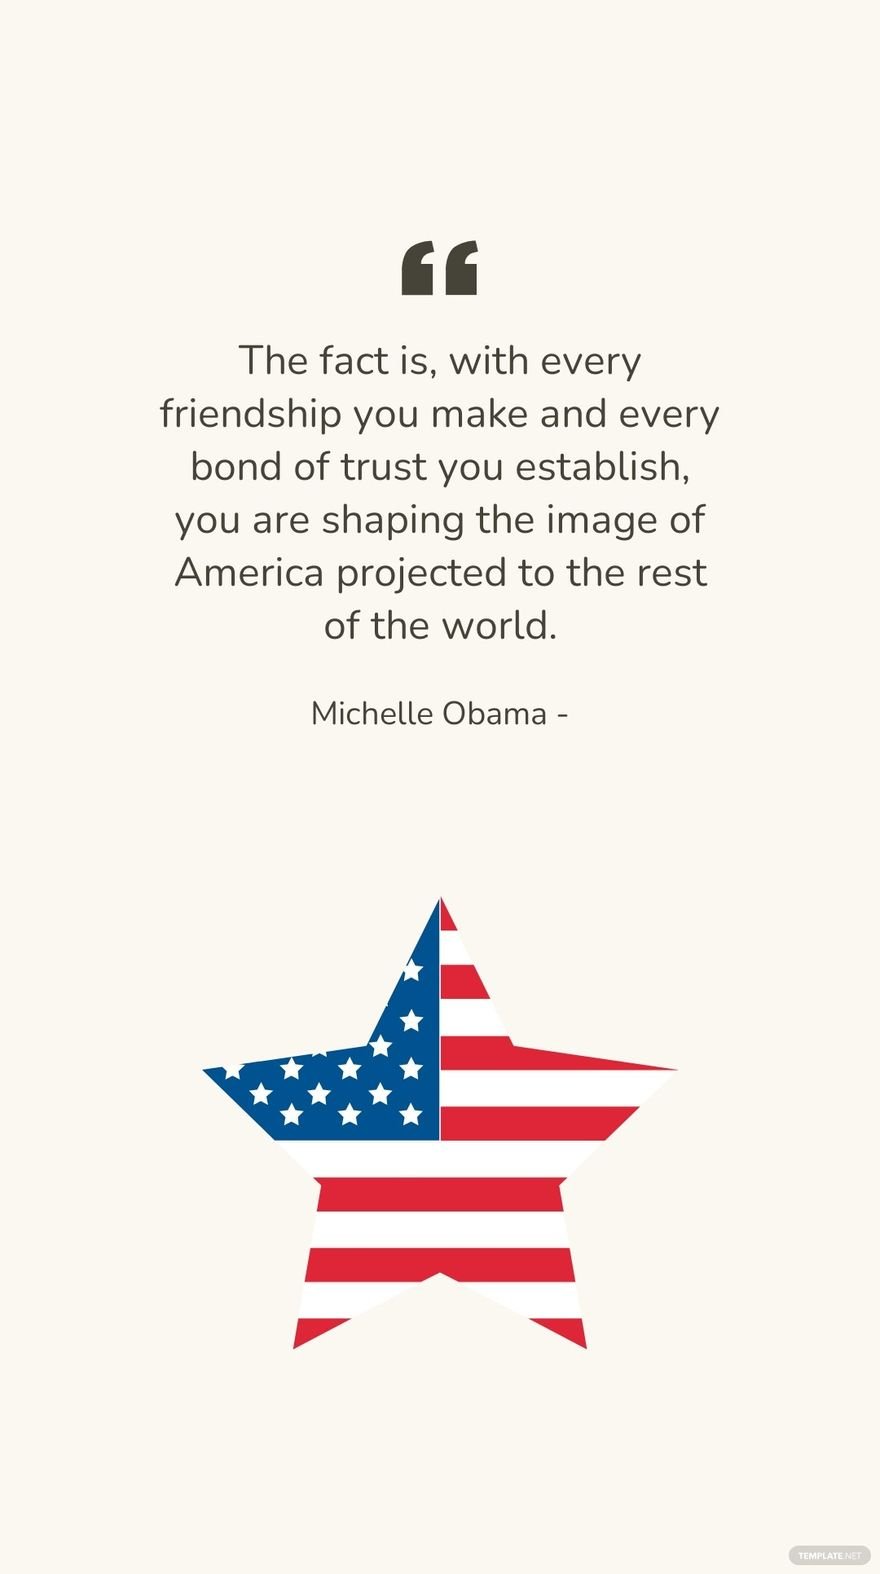 Michelle Obama - The fact is, with every friendship you make and every bond of trust you establish, you are shaping the image of America projected to the rest of the world.